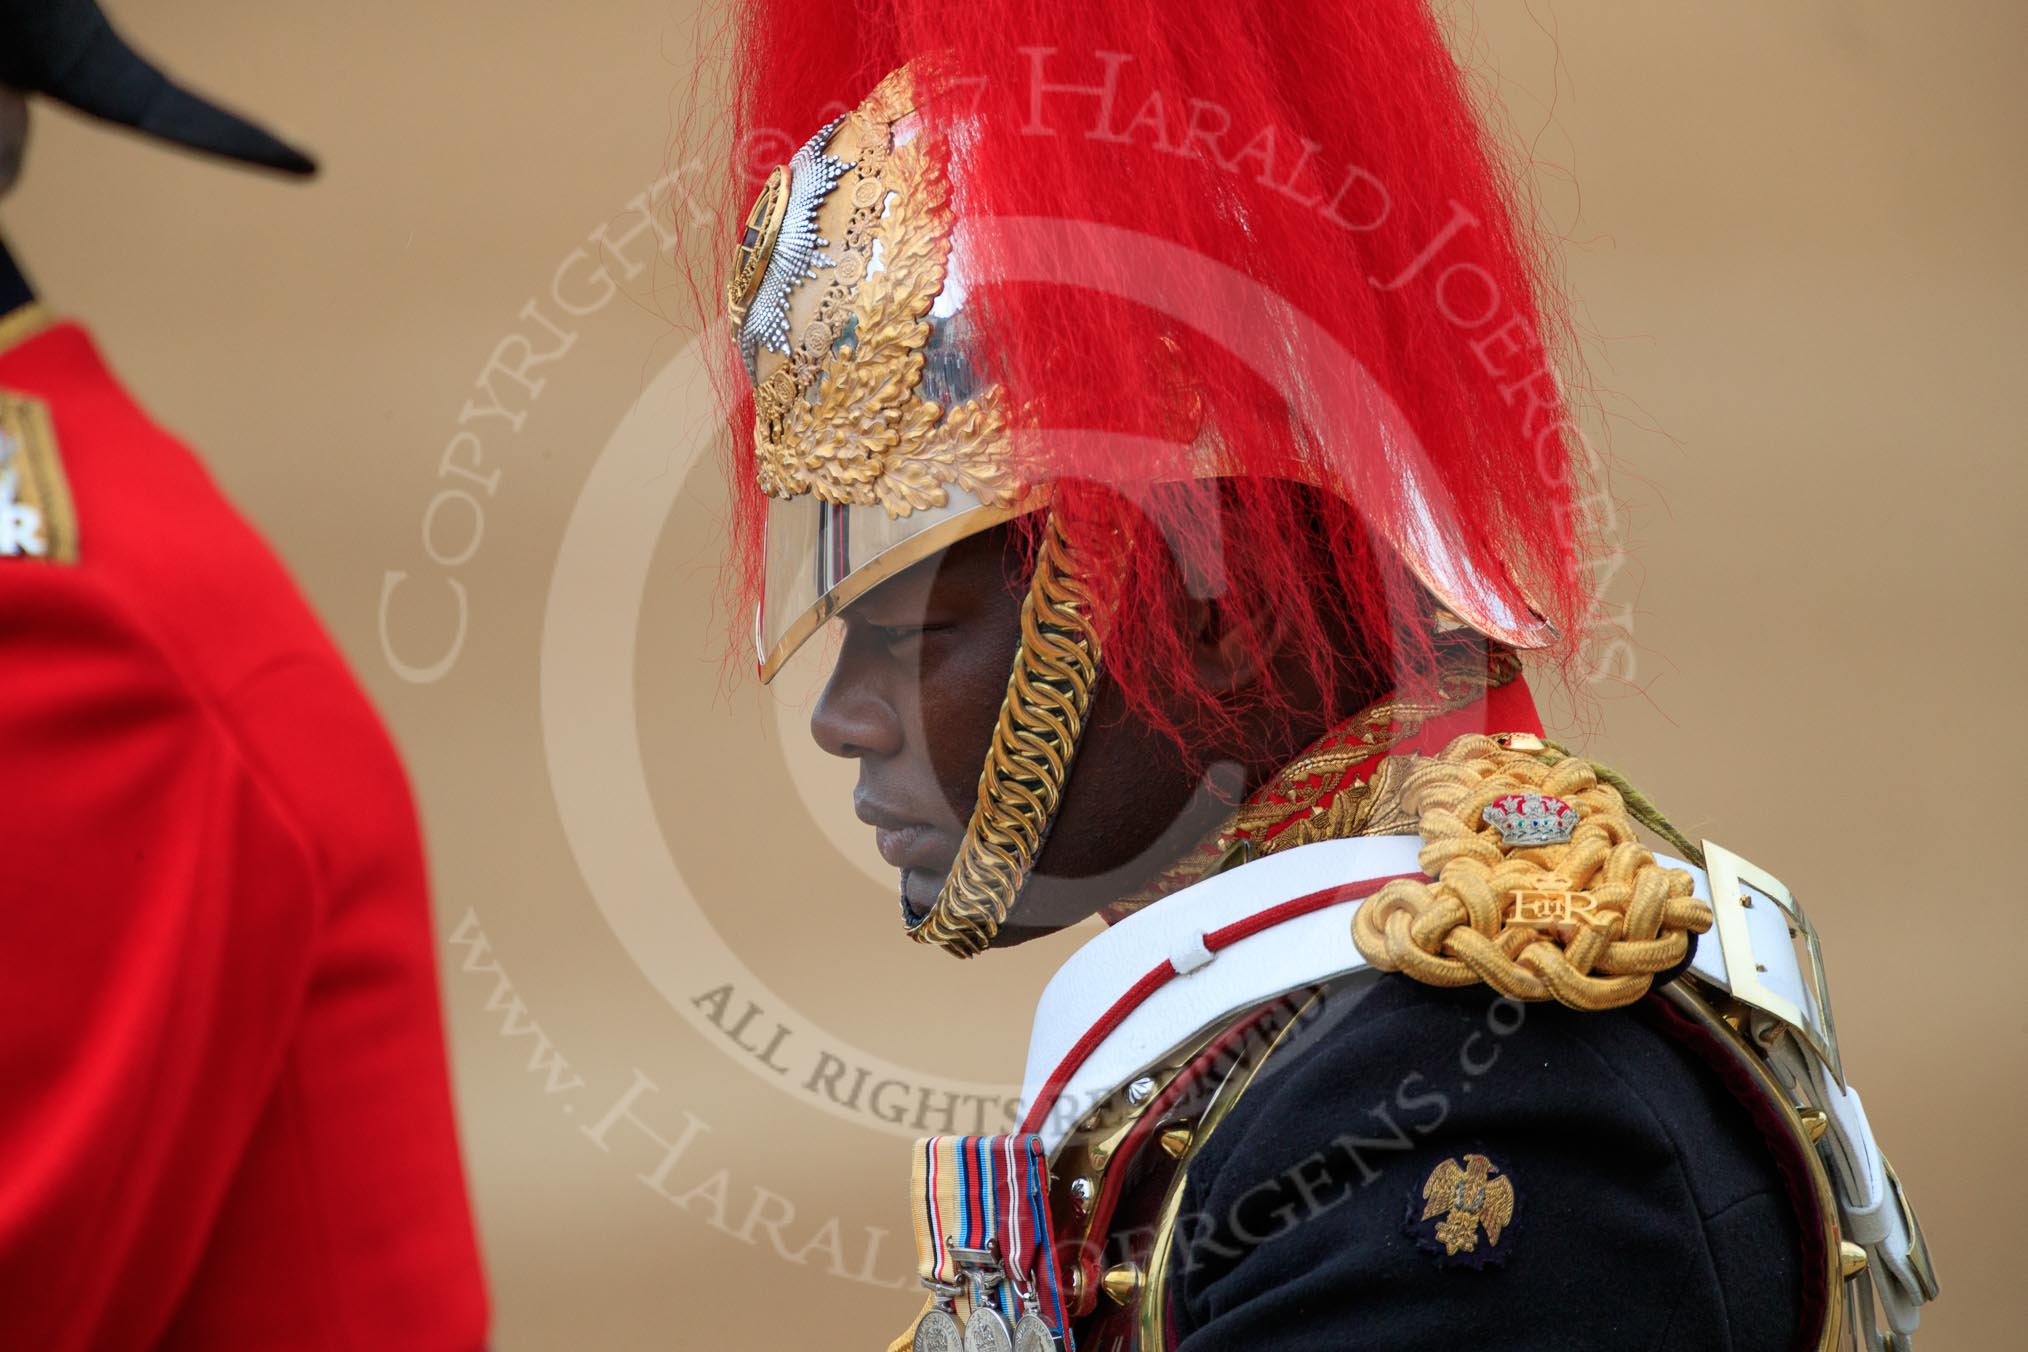 during The Colonel's Review {iptcyear4} (final rehearsal for Trooping the Colour, The Queen's Birthday Parade)  at Horse Guards Parade, Westminster, London, 2 June 2018, 11:01.